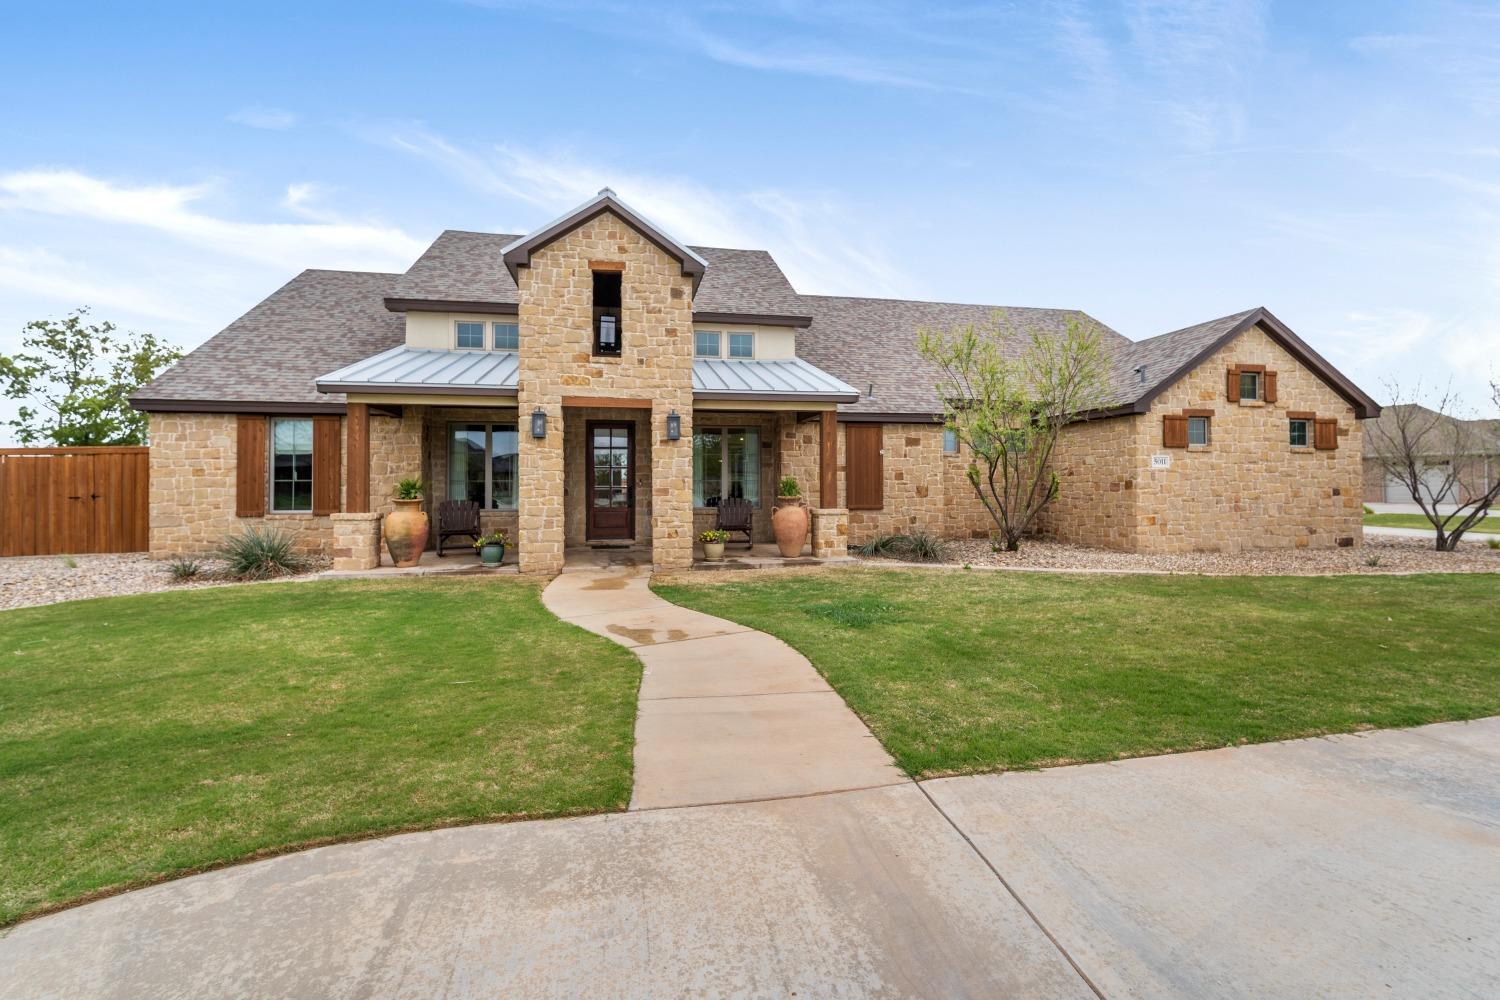 If you are looking for a property that has everything, this one should be at the top of your list. Great Hill Country Feel on 1 acre in South Fork Ranch. This home built in 2017 has been well taken care of and is move in ready. The Home features concrete floors throughout and a large Master Suite. There is a bonus room as well that has its own entrance from the driveway. Also, there is a 900 square foot Mother in Law area built on the back of the house. The Mother in Law area has a living, dining, kitchen area as well as a separate bedroom and large bath with closet that has washer dryer hook ups and is also a safe room. It has its own garage as well. The outdoor area is amazing with a salt water pool with slide and a great outdoor kitchen. As if that wasn't enough, there is a heated and cooled shop as well.